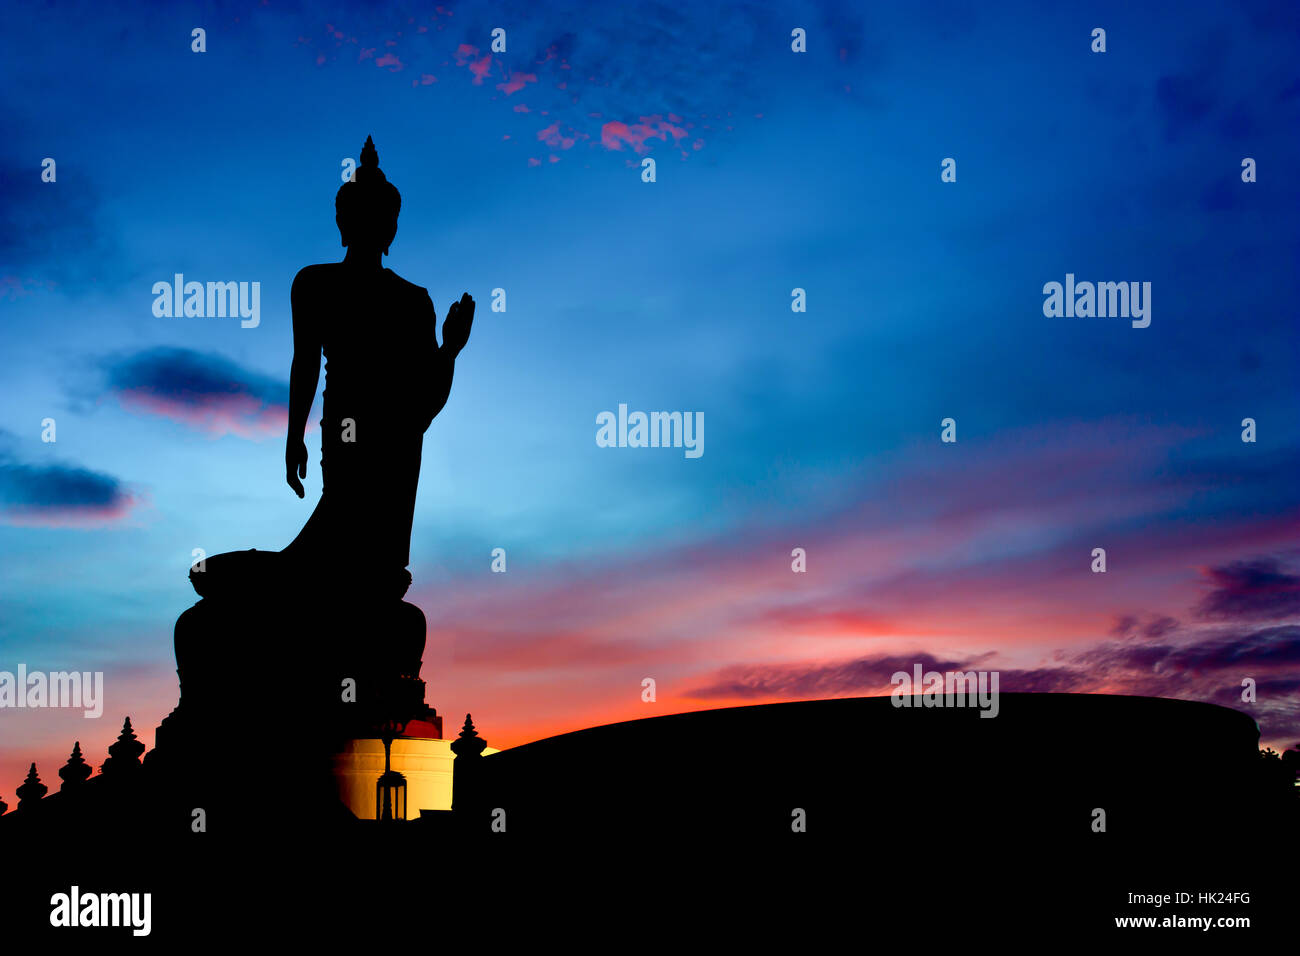 Silhouette Of The Posture Of Walking Buddhist Statue In Twilight Stock Photo